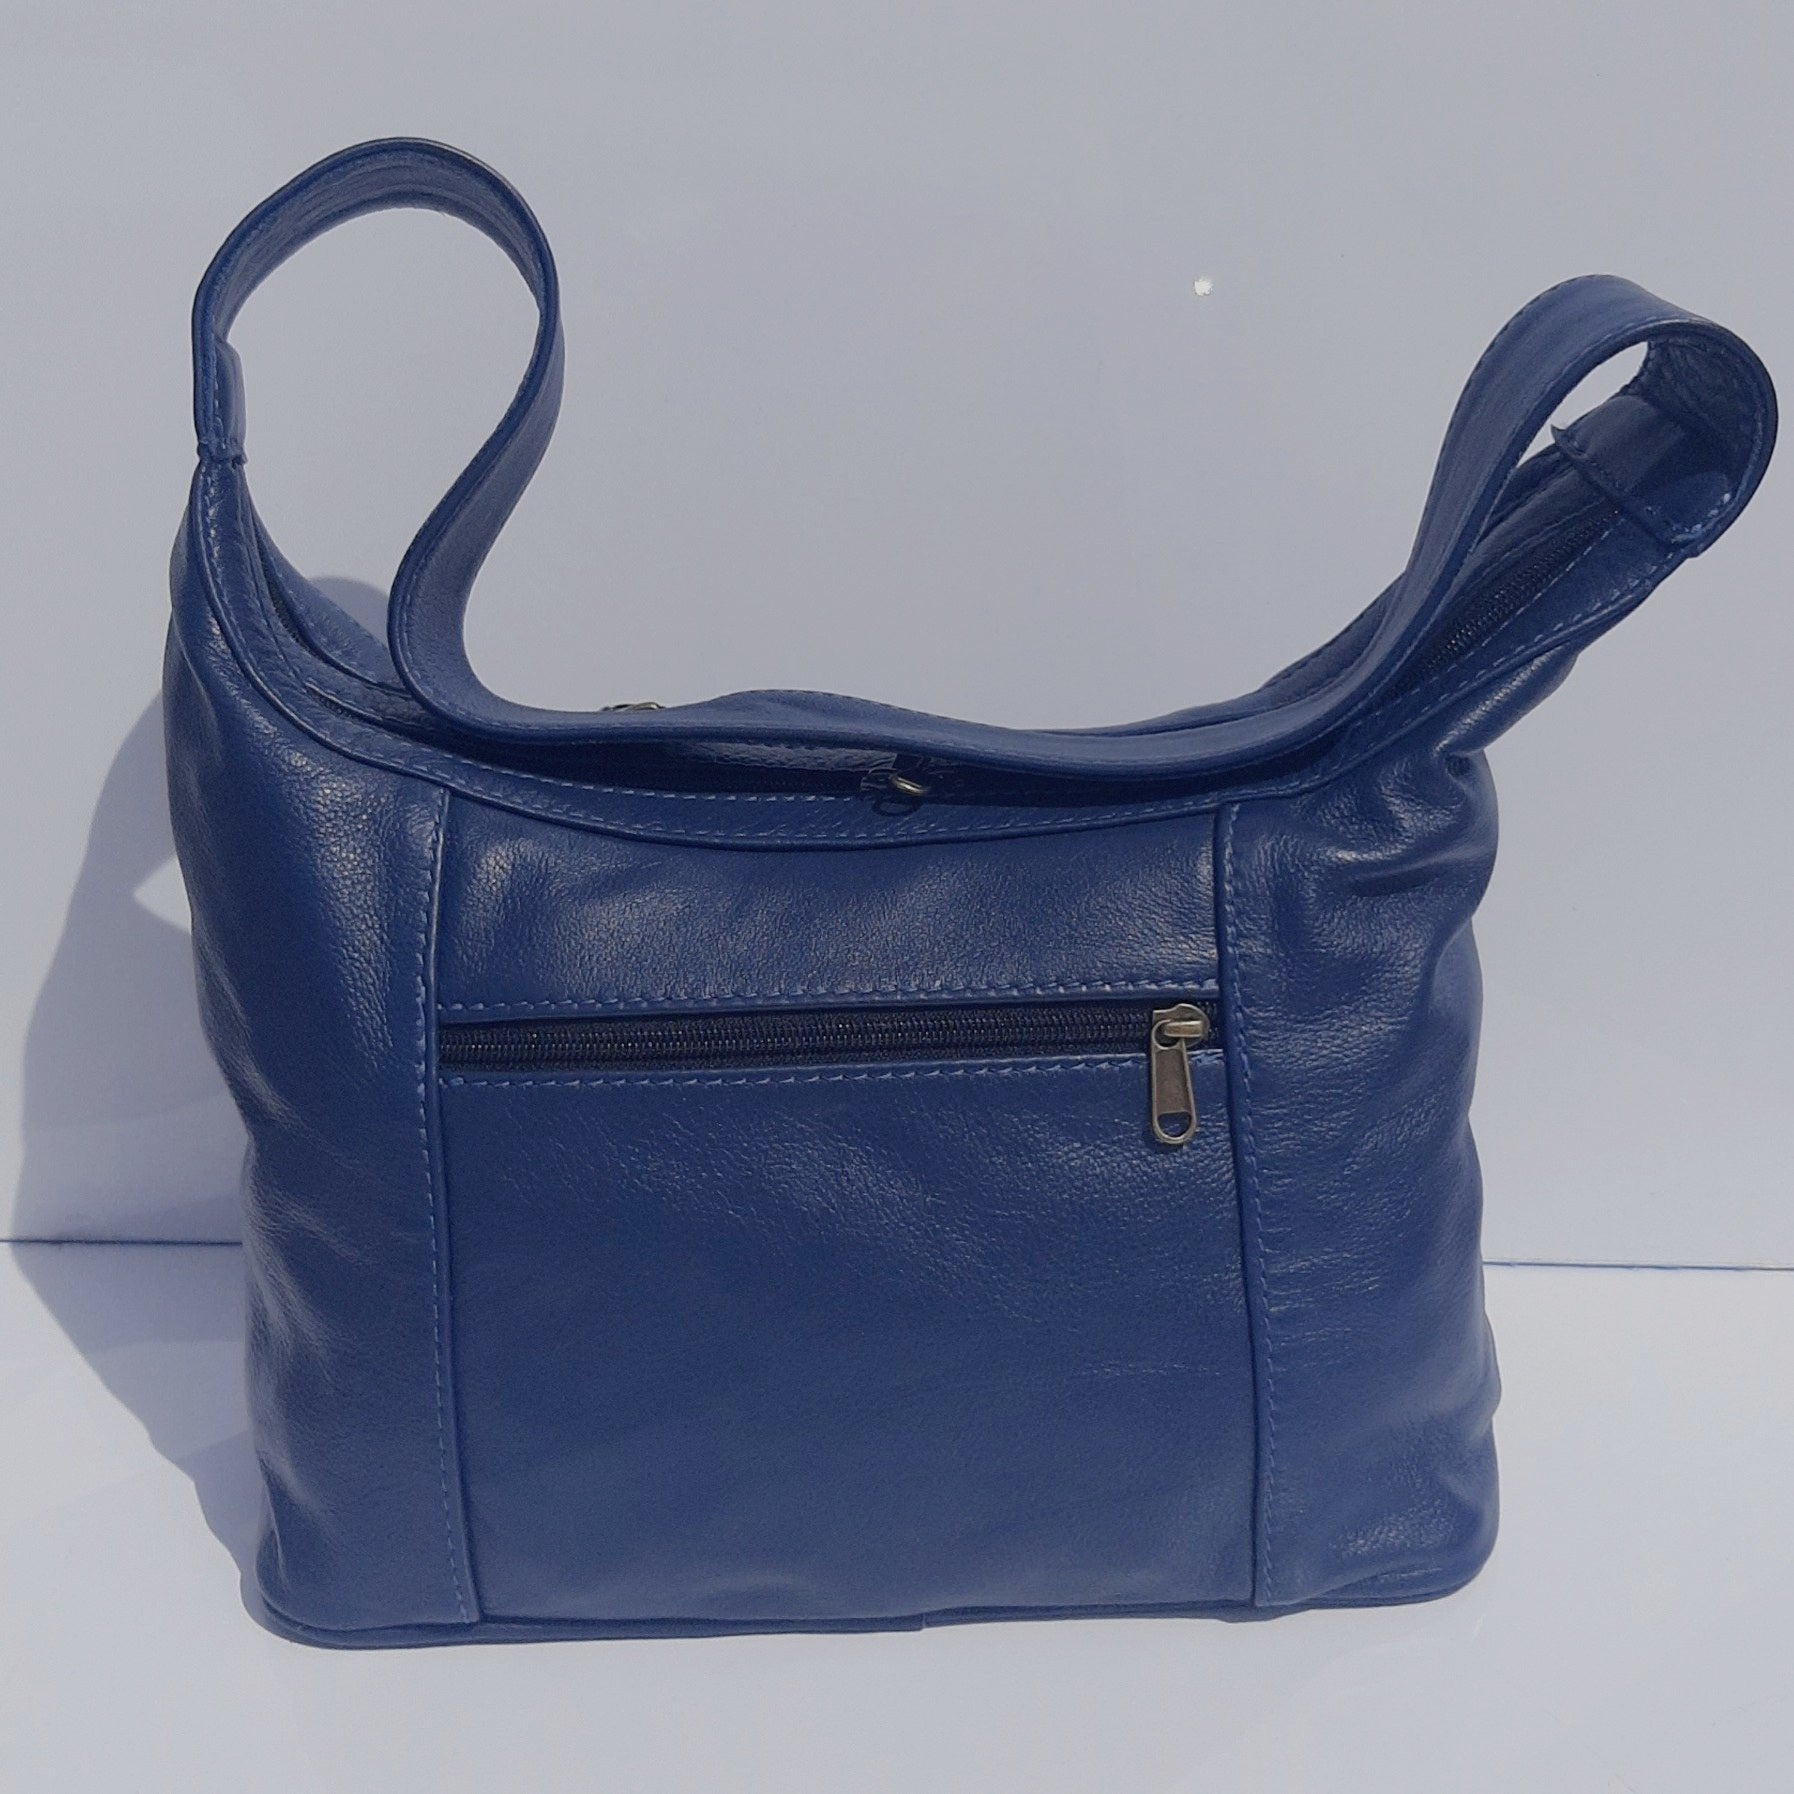 Gb7 leather bags in Navy blue made by cape Masai Leather